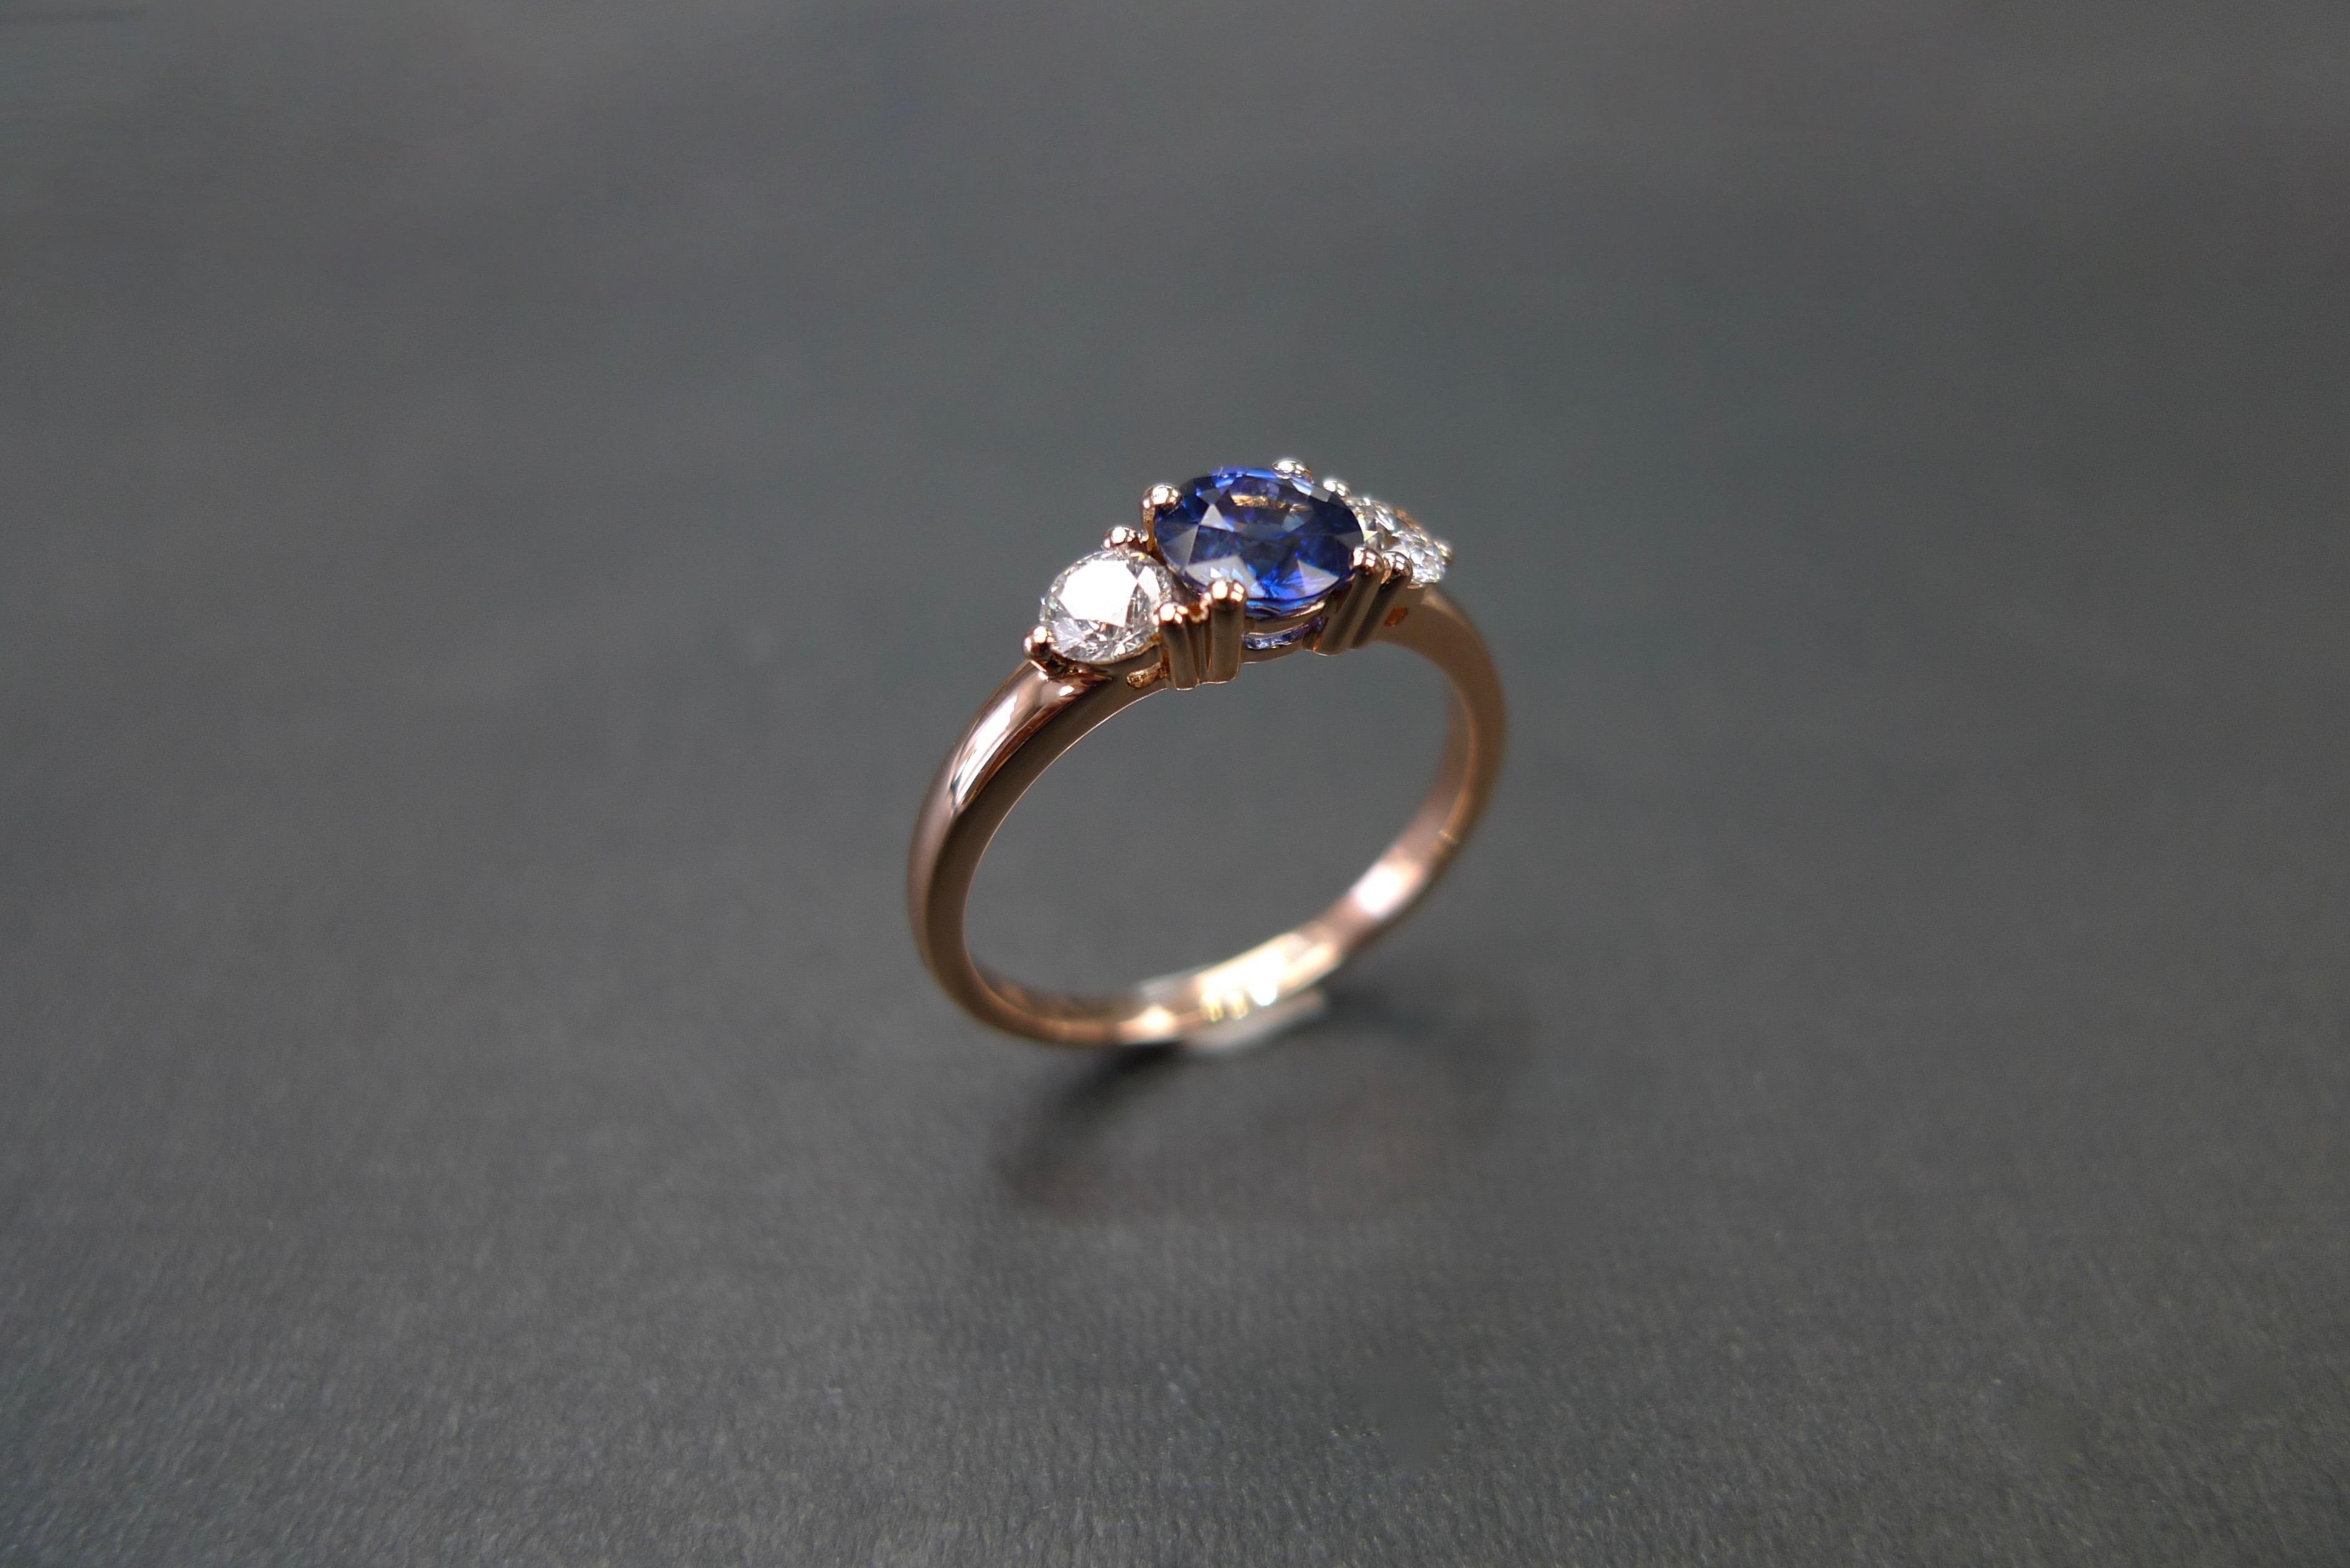 For Sale:  Three-Stone Ring with Blue Sapphire and Round Brilliant Cut Diamond in Rose Gold 10